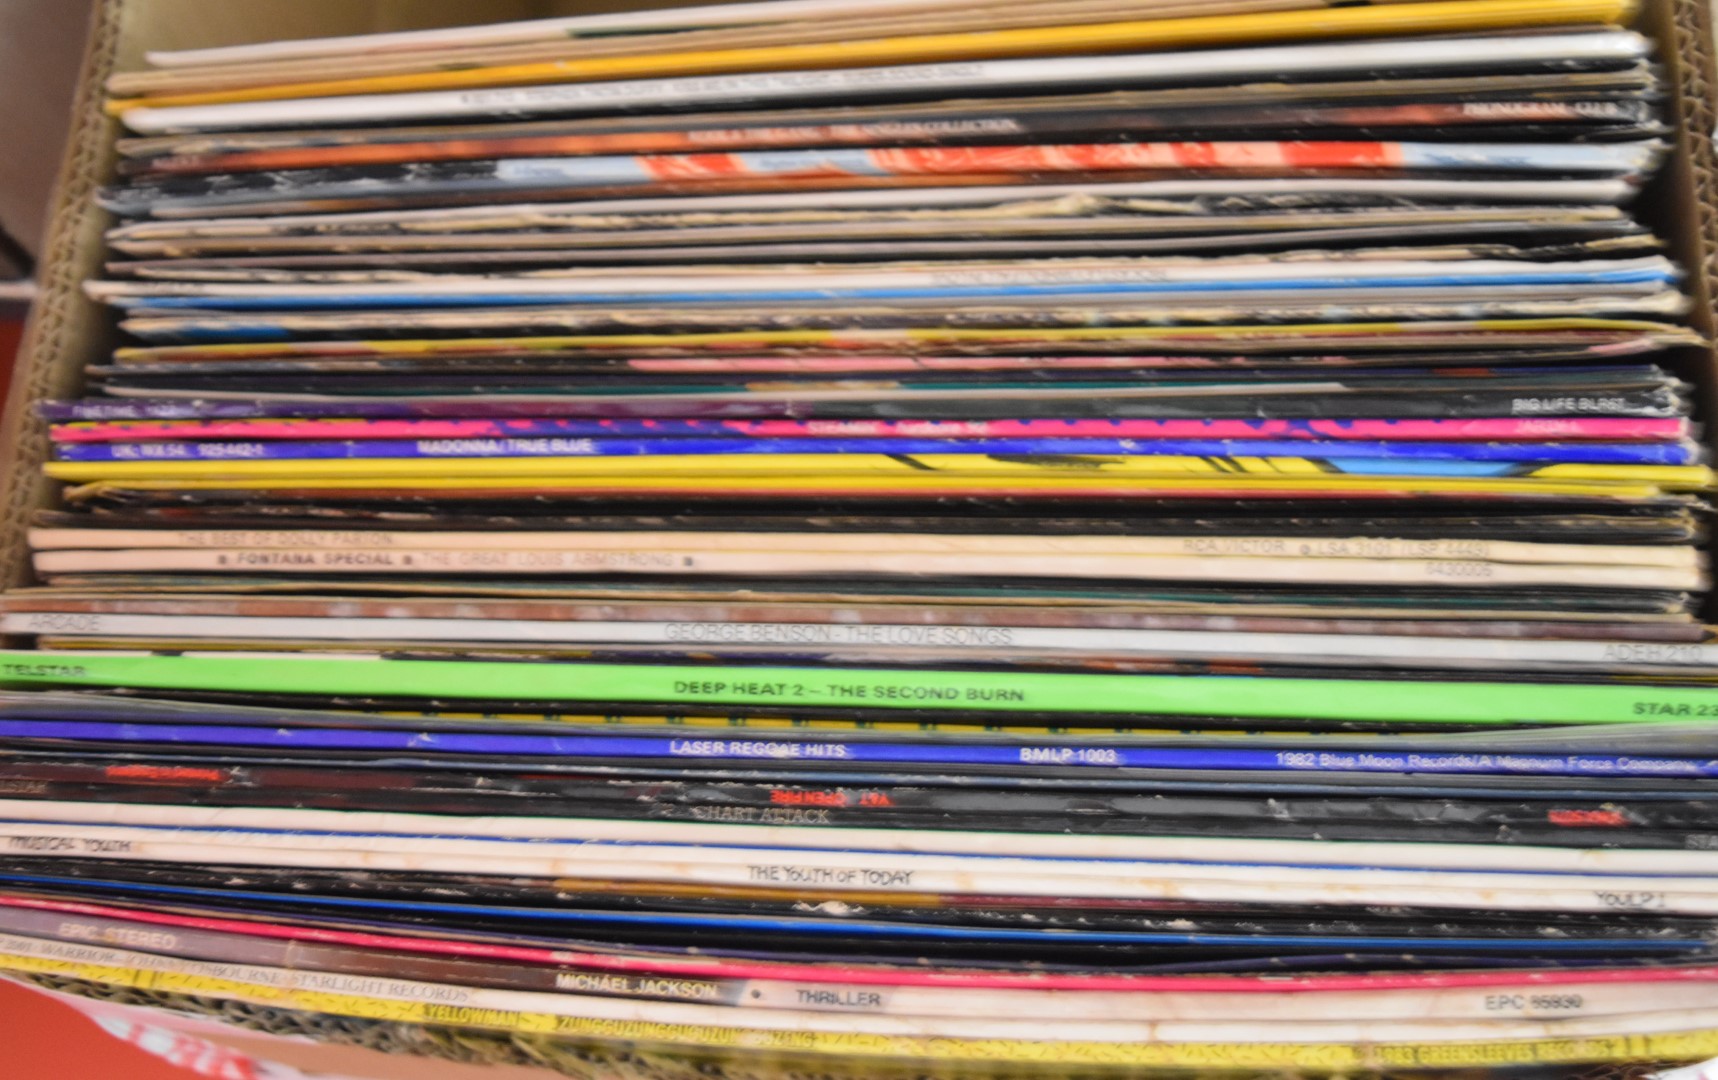 Collection of approximately 70 Reggae, Soul & Dance LPs and 12" singles including Yellowman - Image 4 of 4